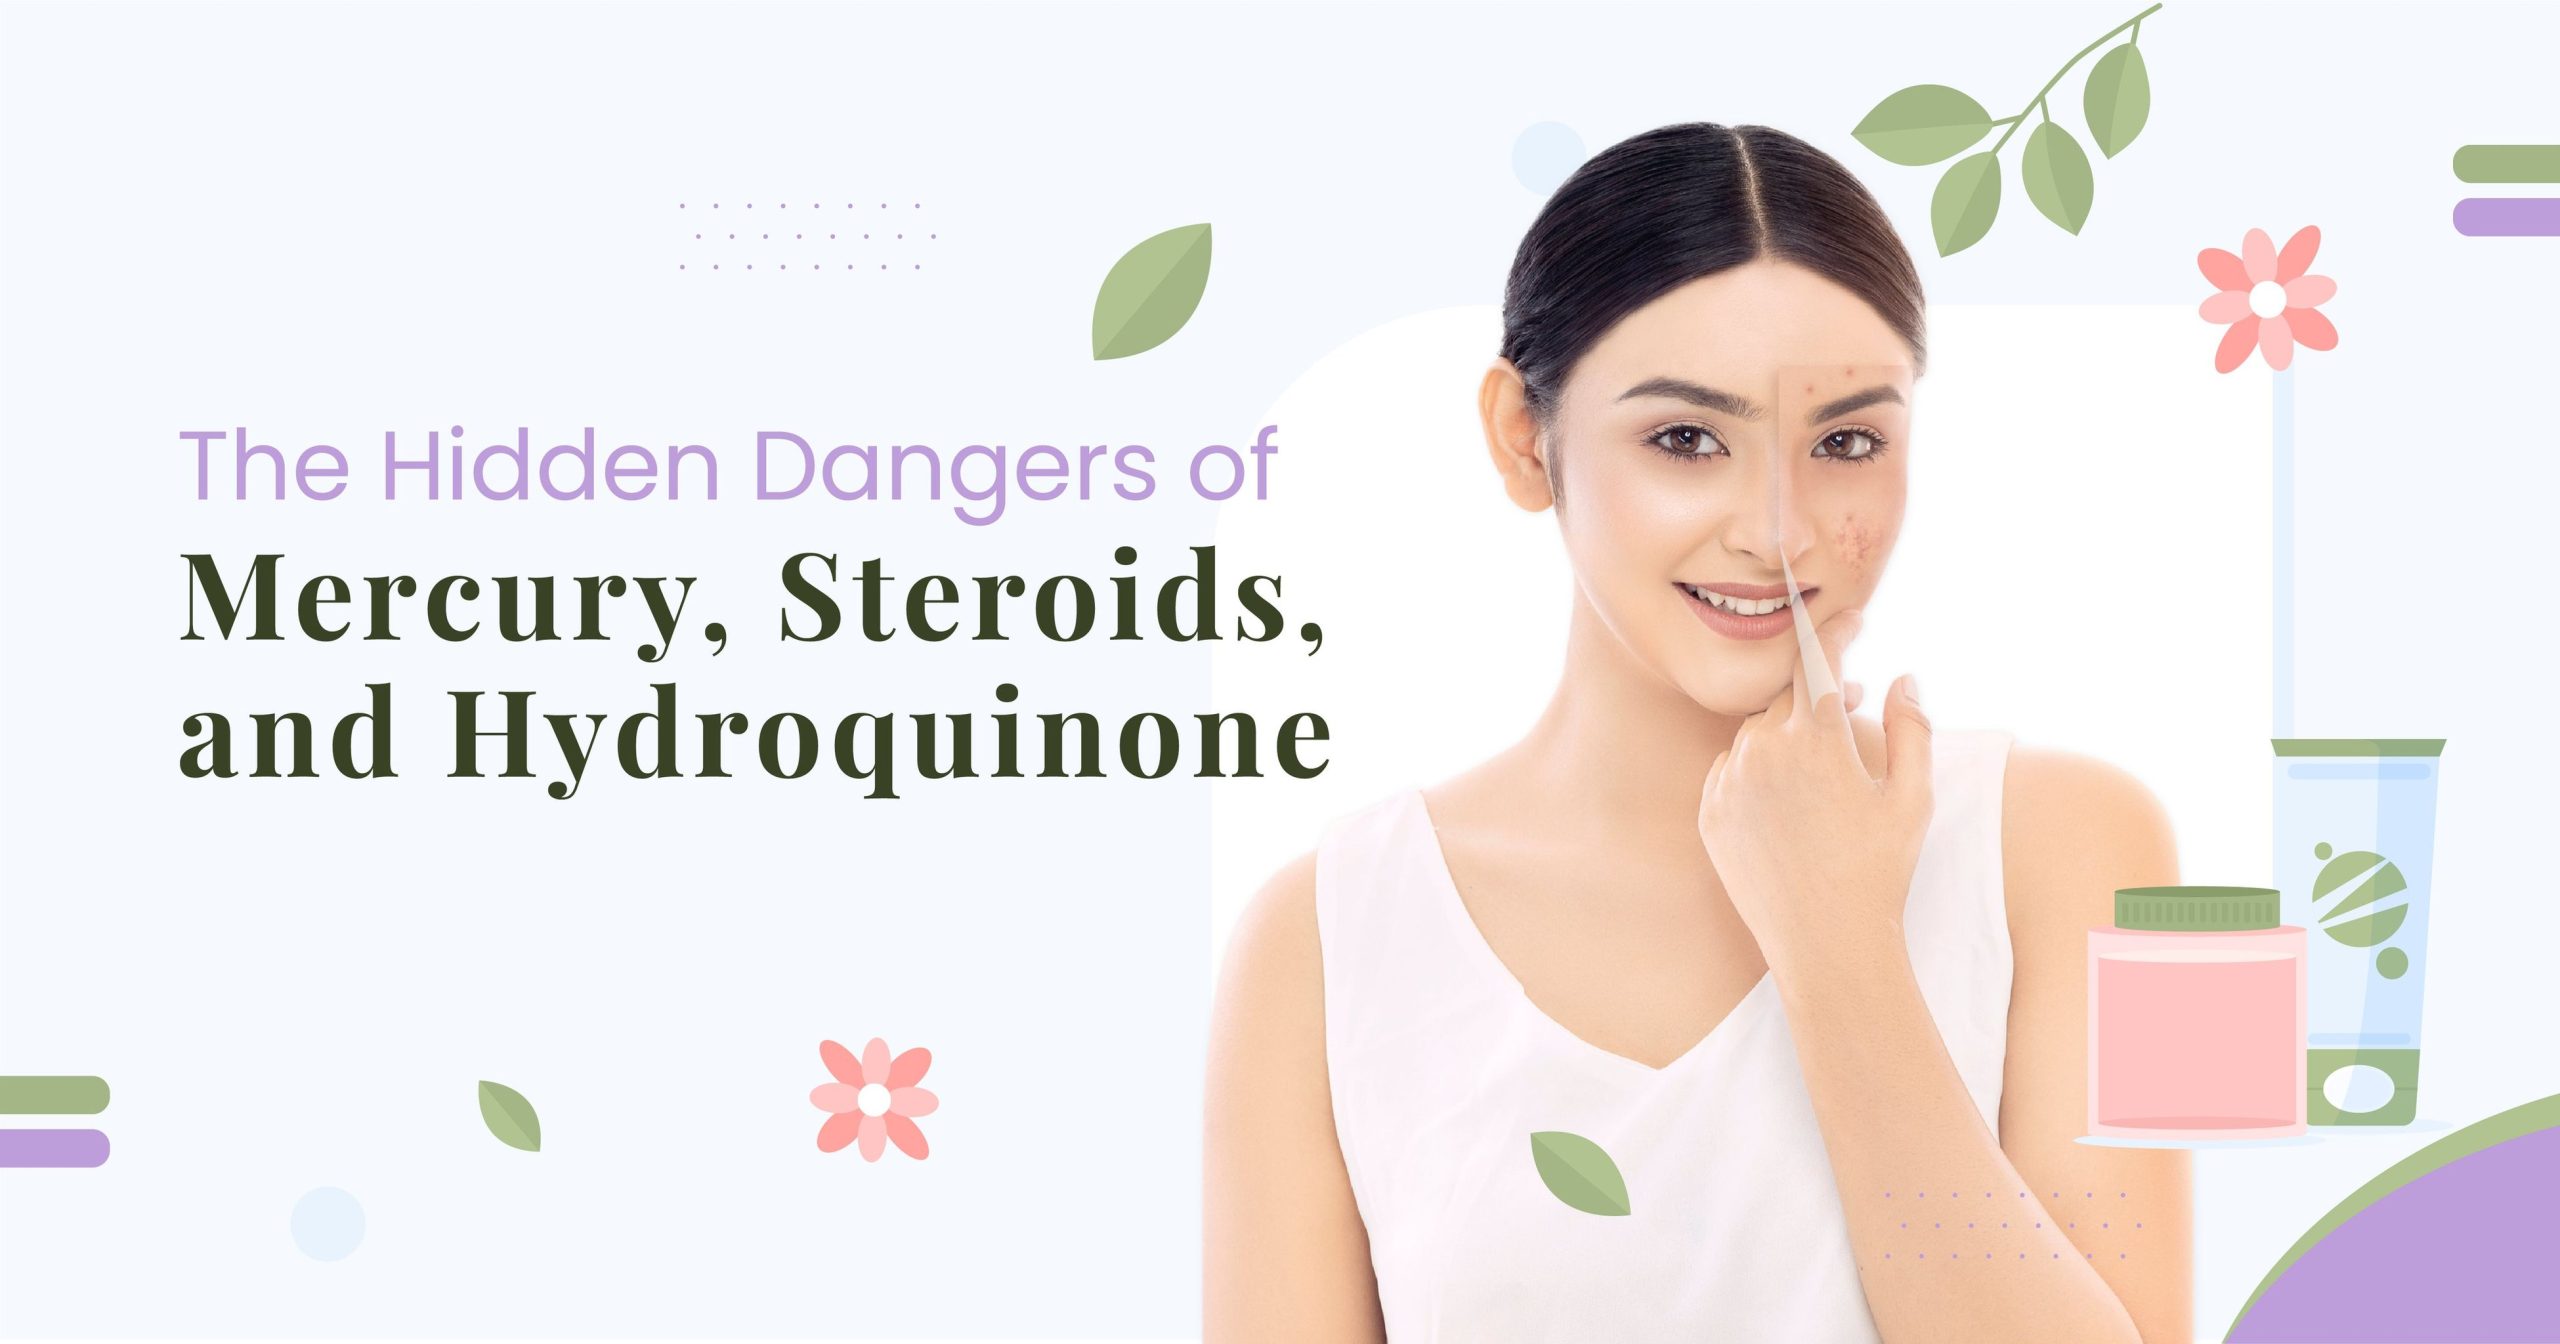 The Hidden Dangers of Mercury, Steroids, and Hydroquinone: “Why Bio-Xin Cosmeceuticals is the Safer Choice"